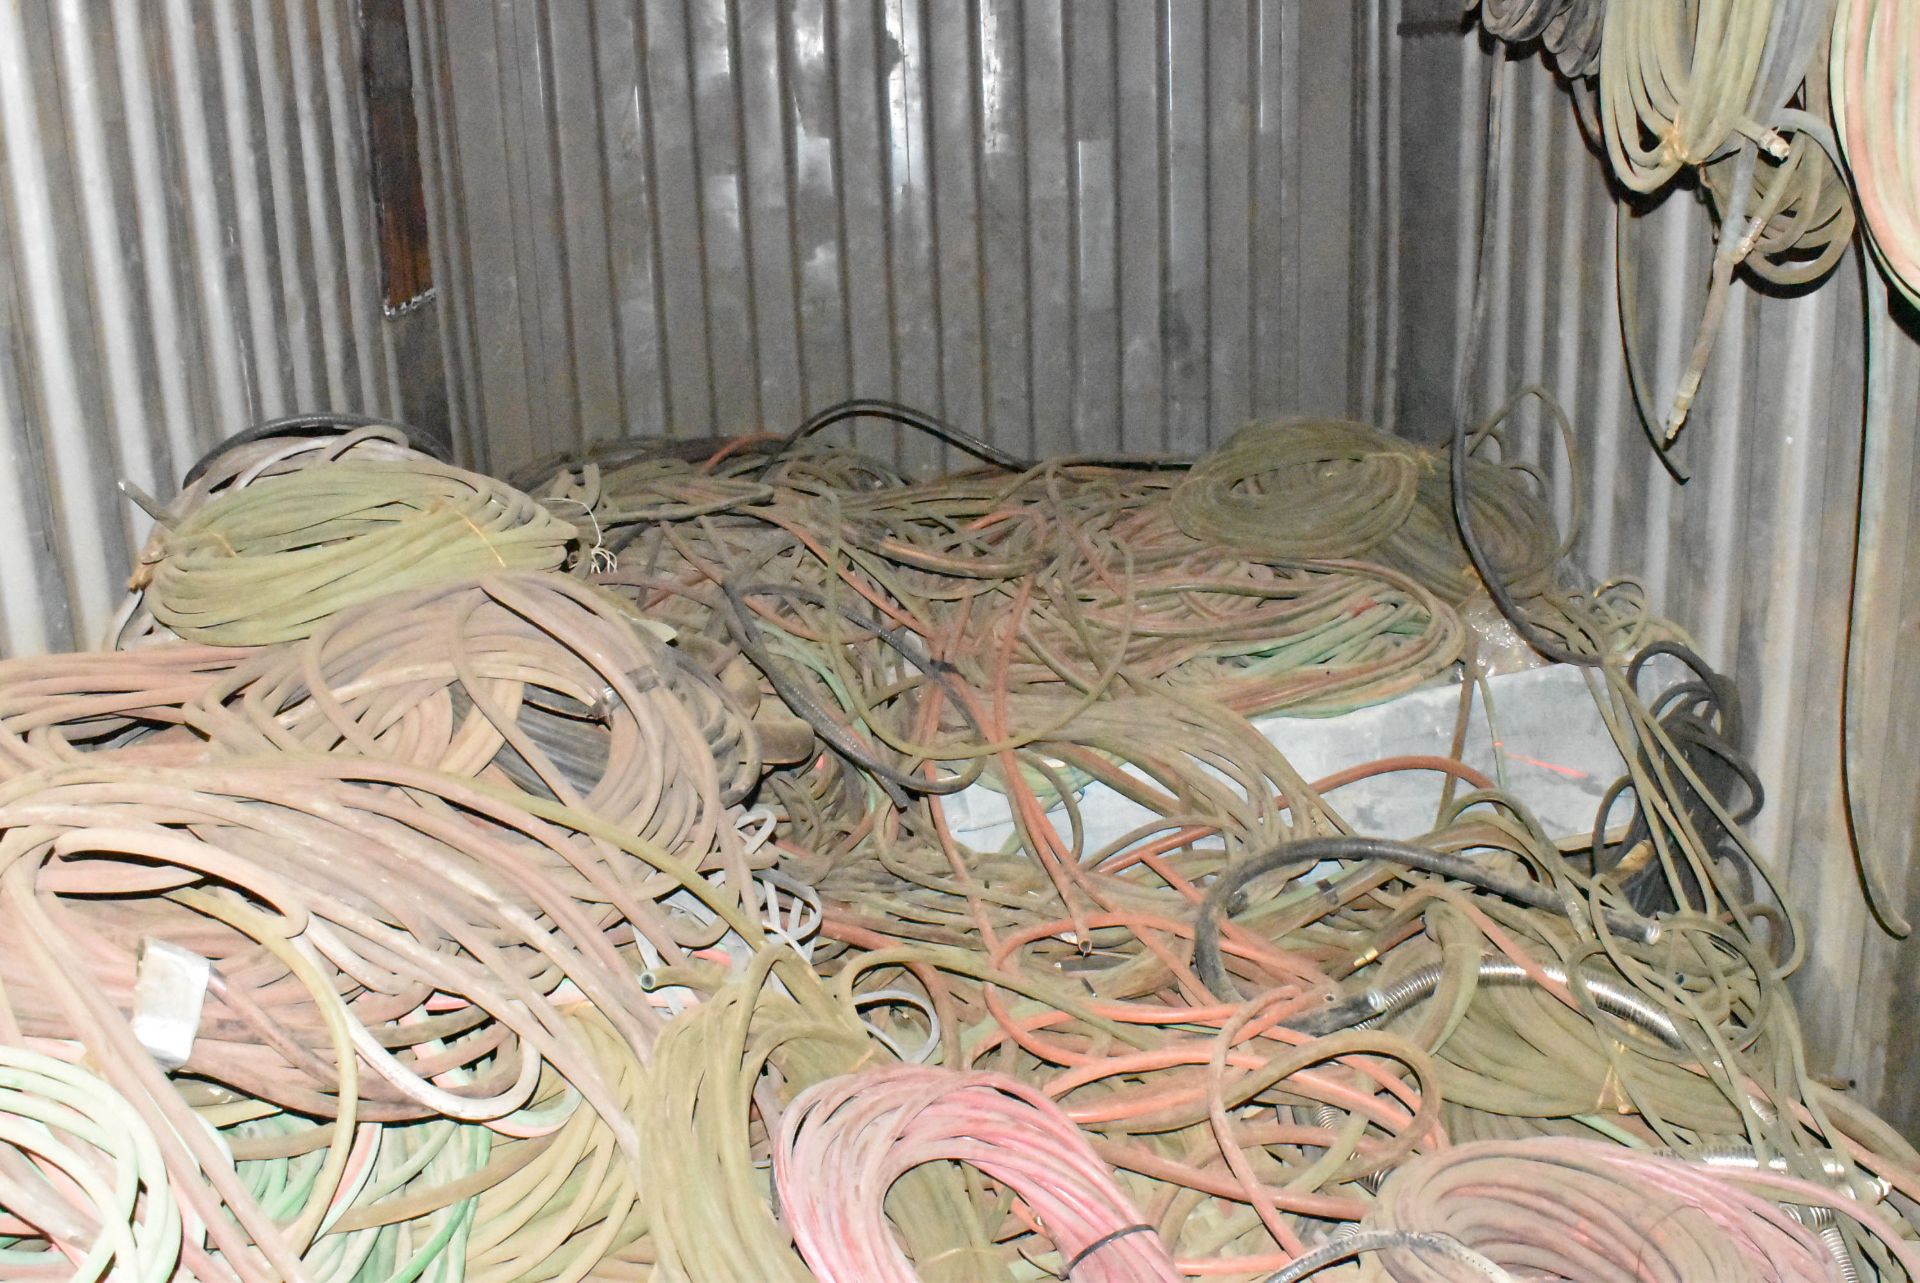 LOT/ CONTENTS OF CONTAINER - PNEUMATIC HOSE, HYDRAULIC HOSE, WELDING CABLES, OXY-ACETYLENE HOSE - Image 4 of 4